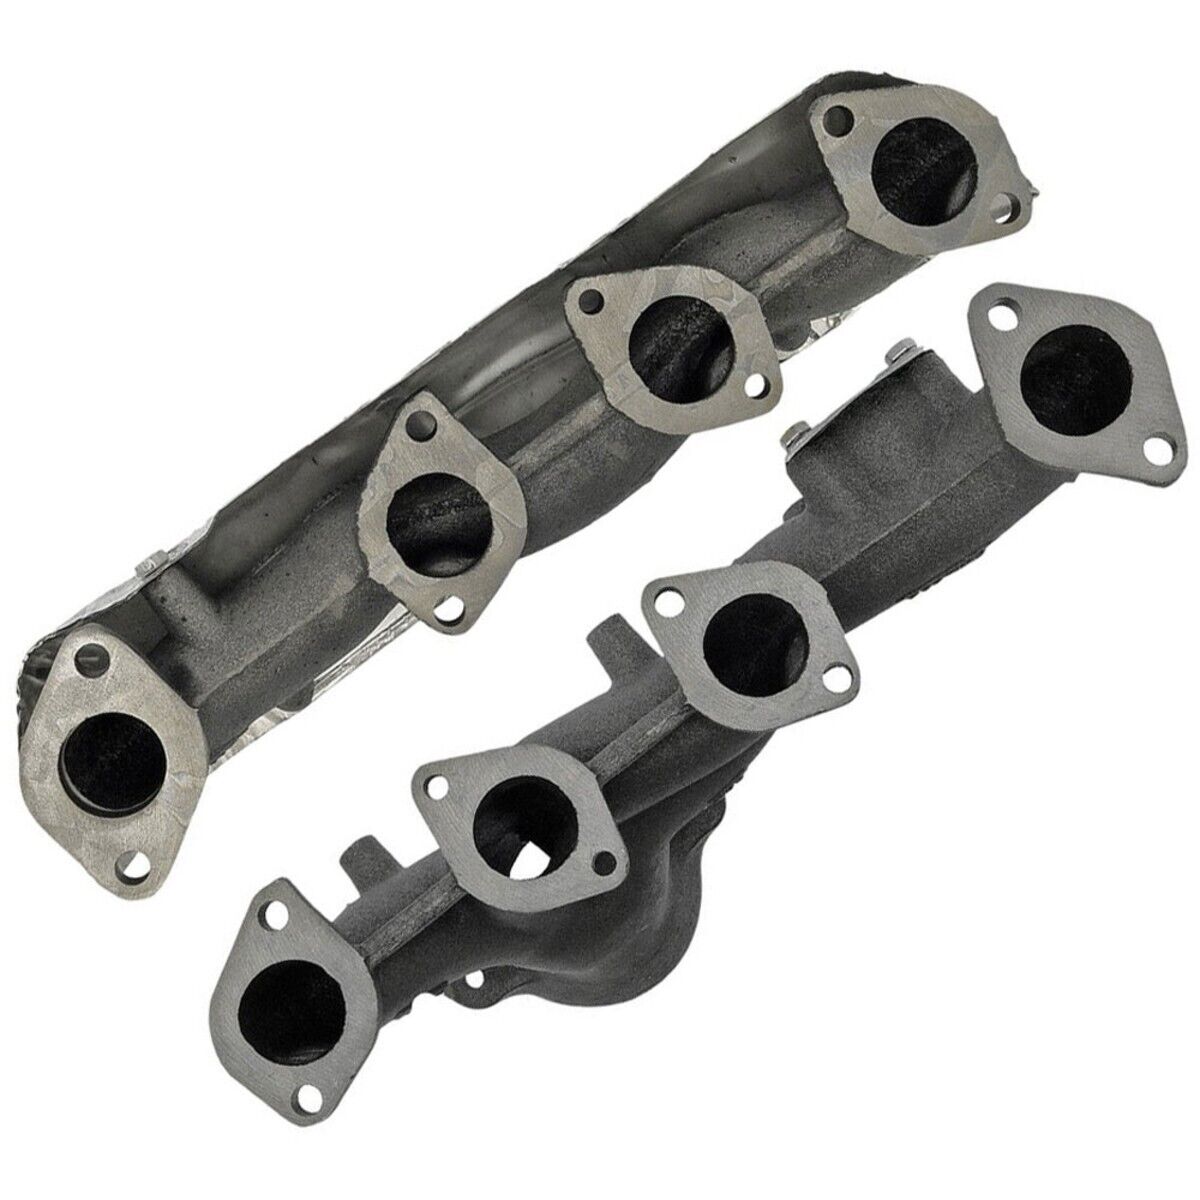 SET-RB674515 Dorman Set of 2 Exhaust Manifolds Front & Rear for Le Baron Pair